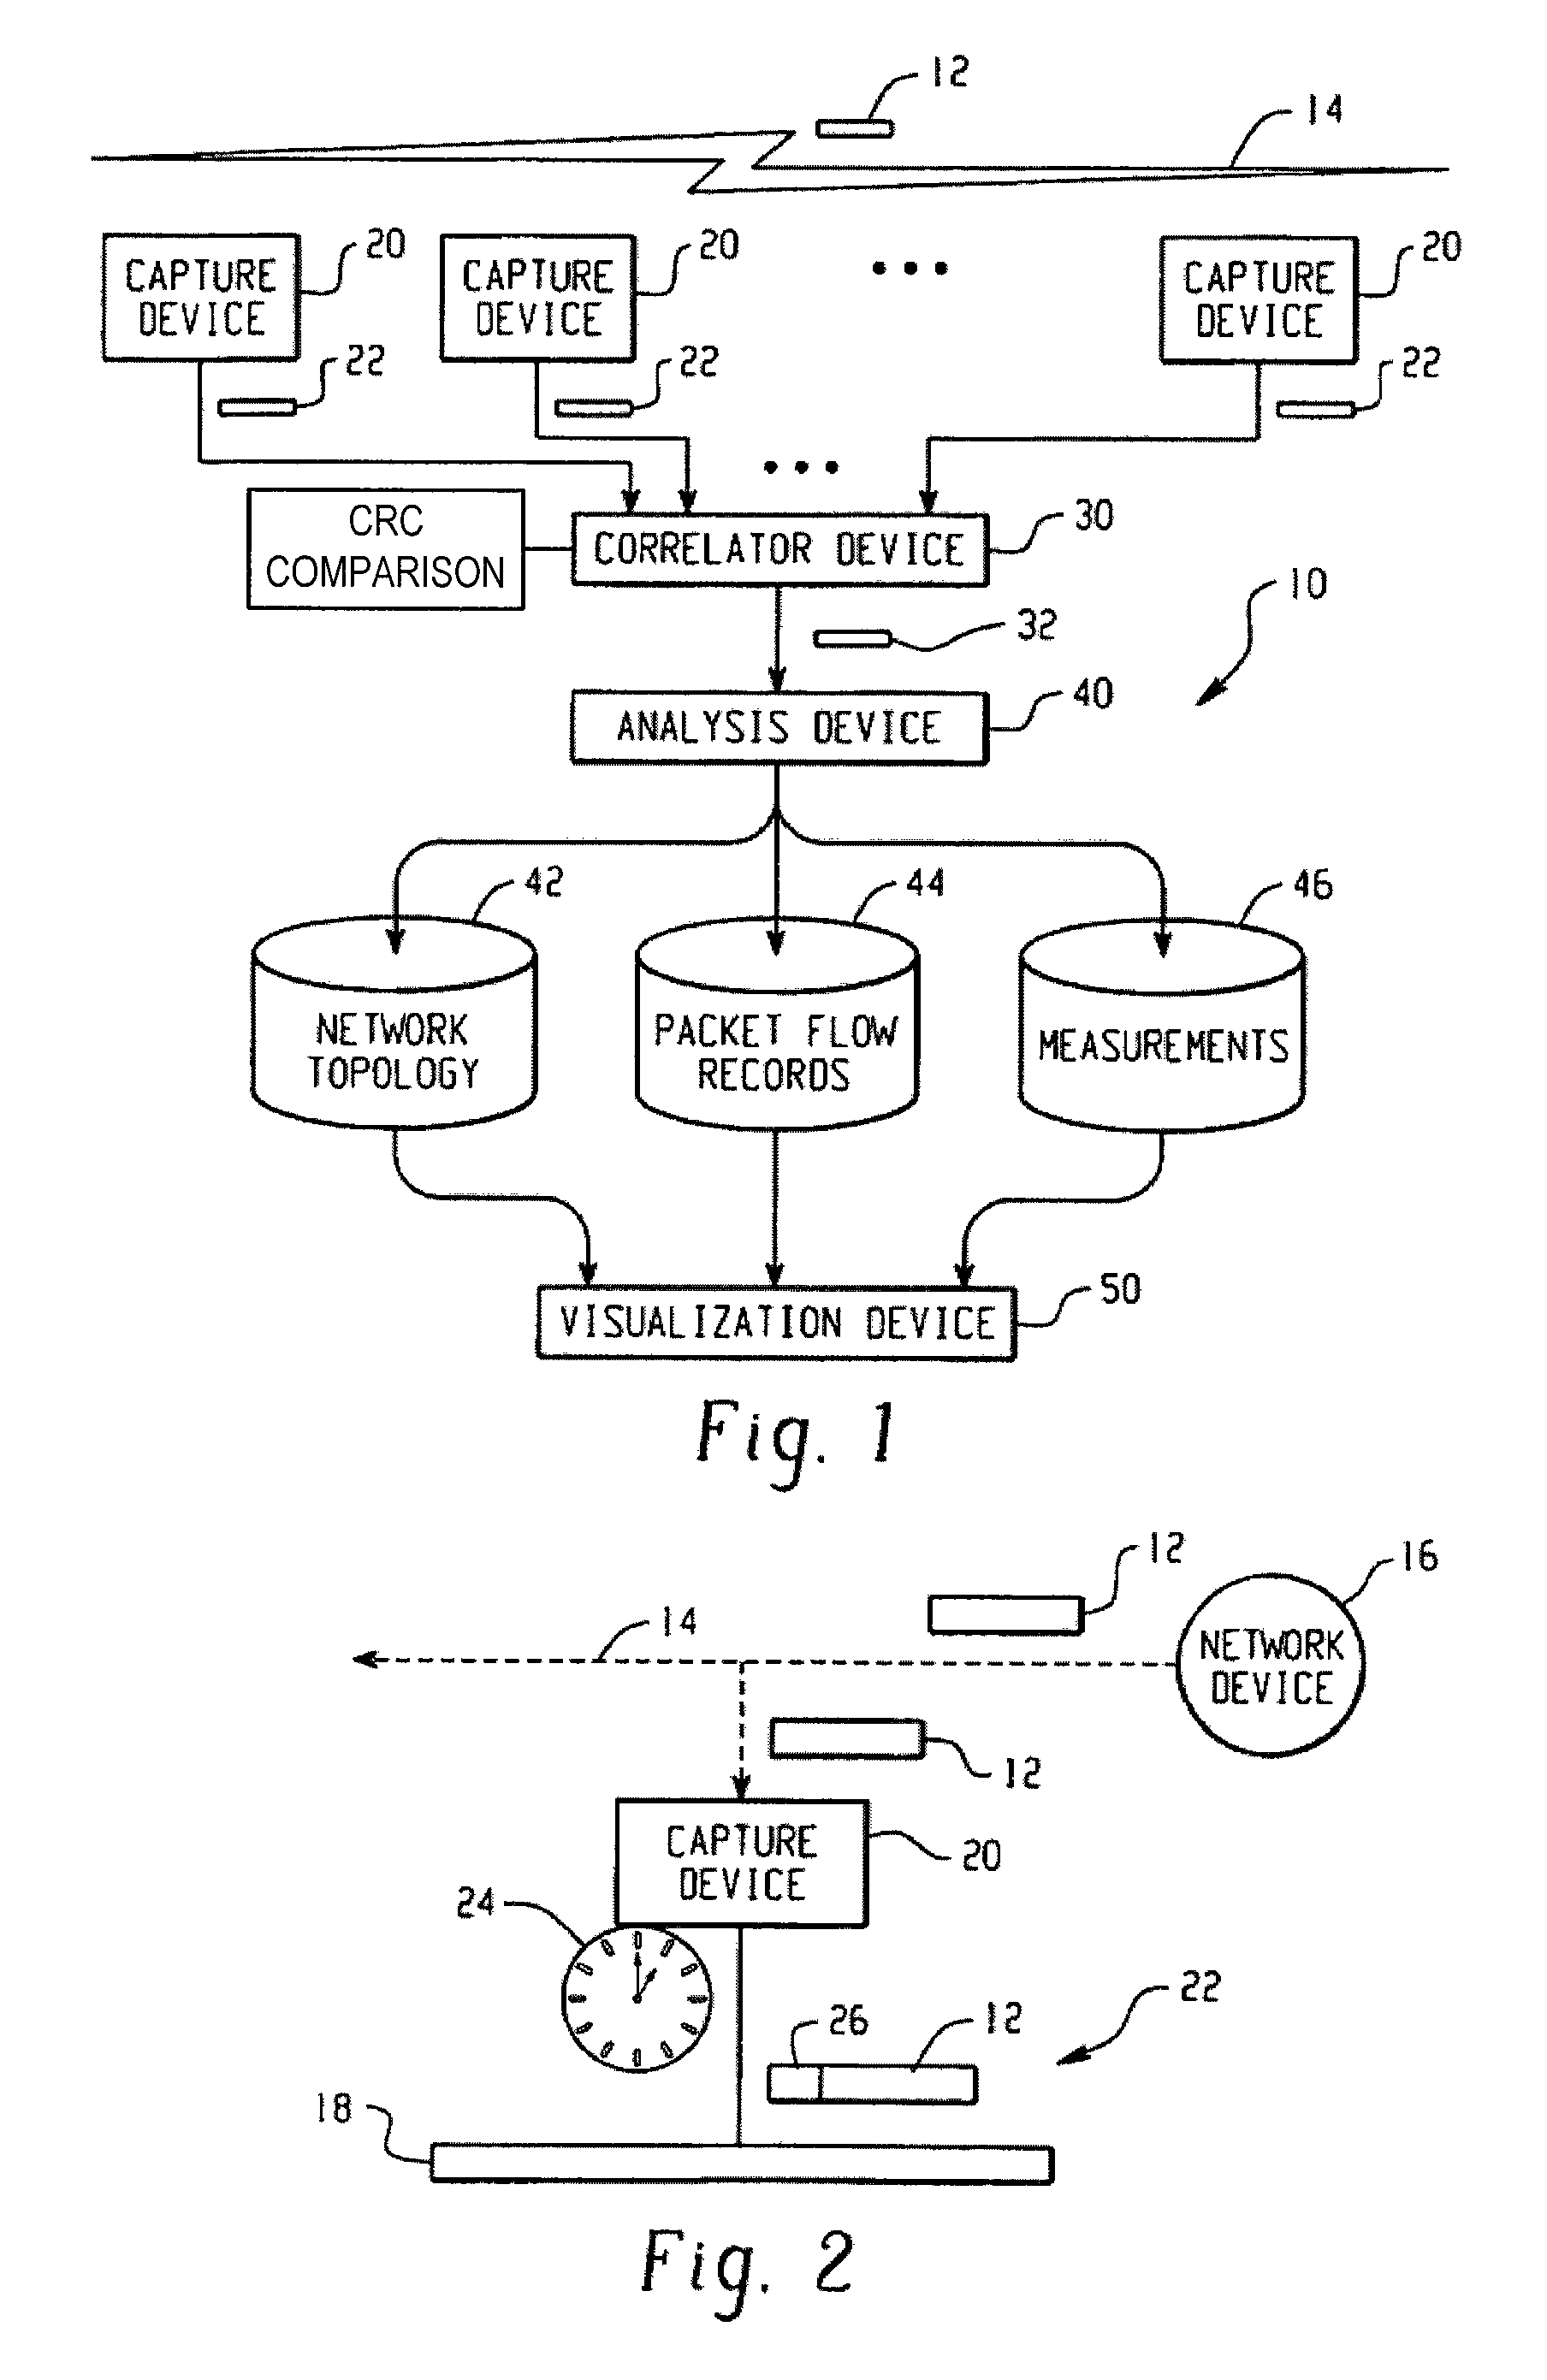 Network analysis system and method